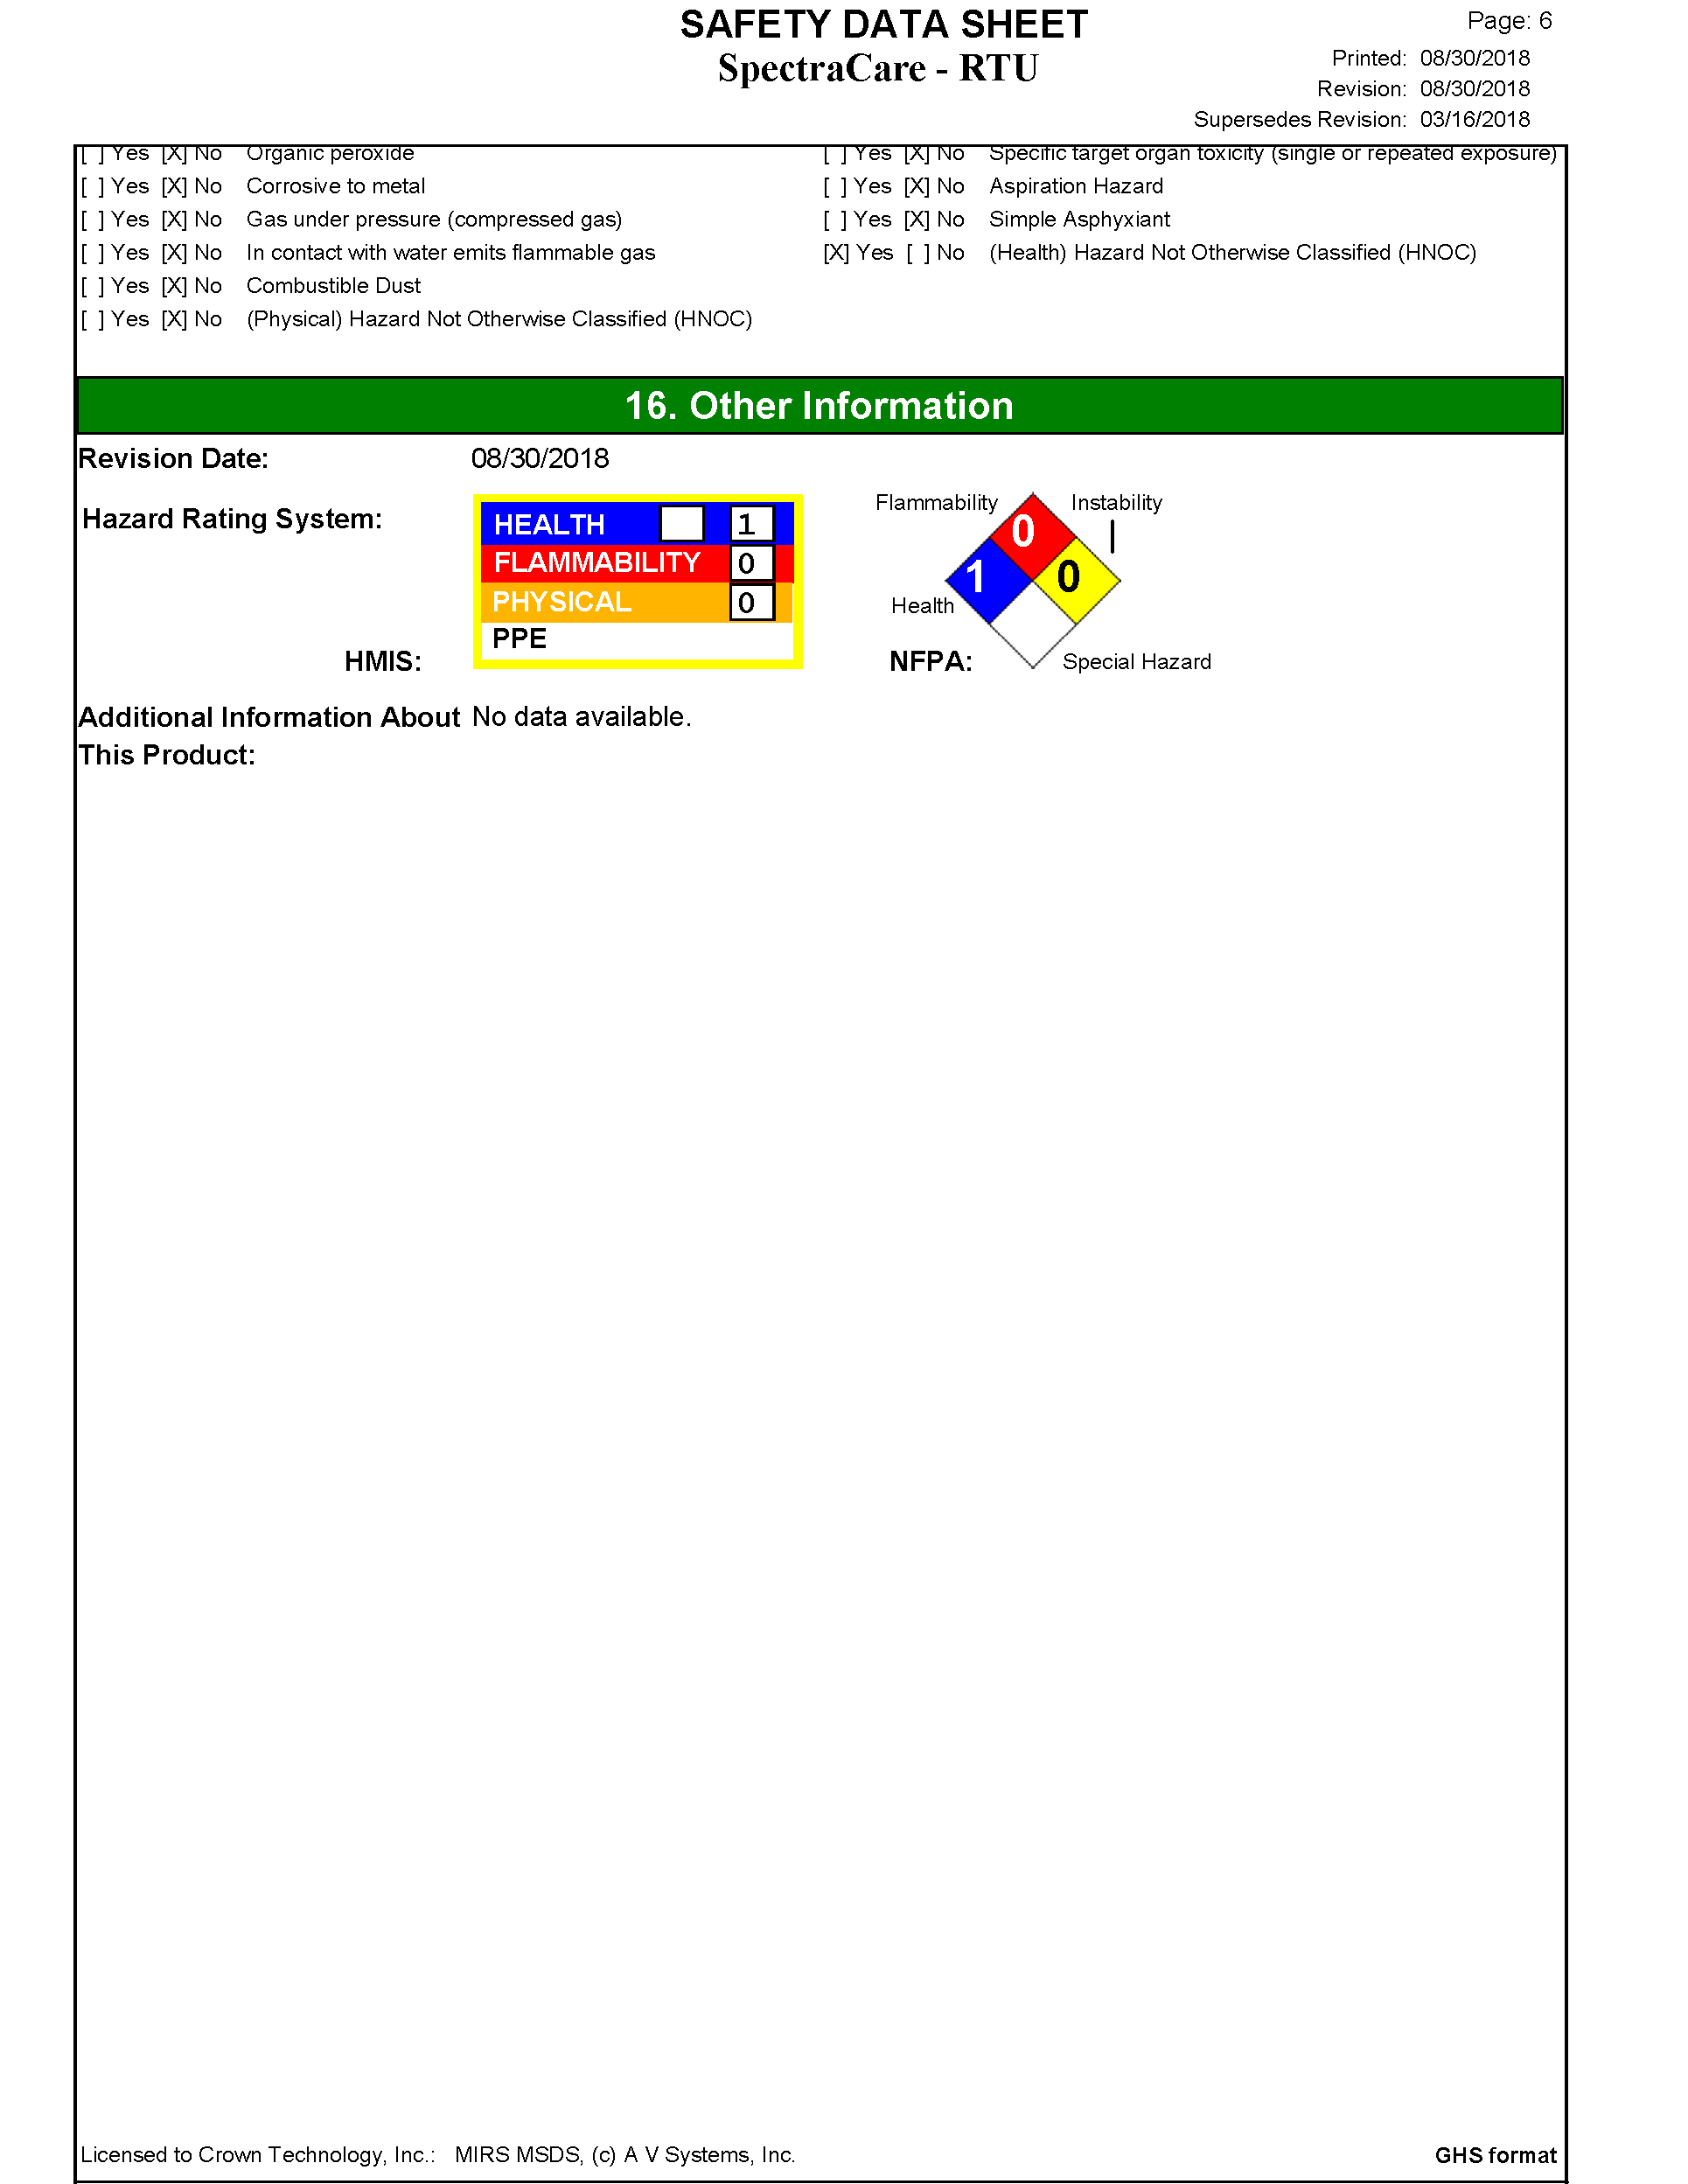 SpectraCare RTU_SDS-Full_Page_6